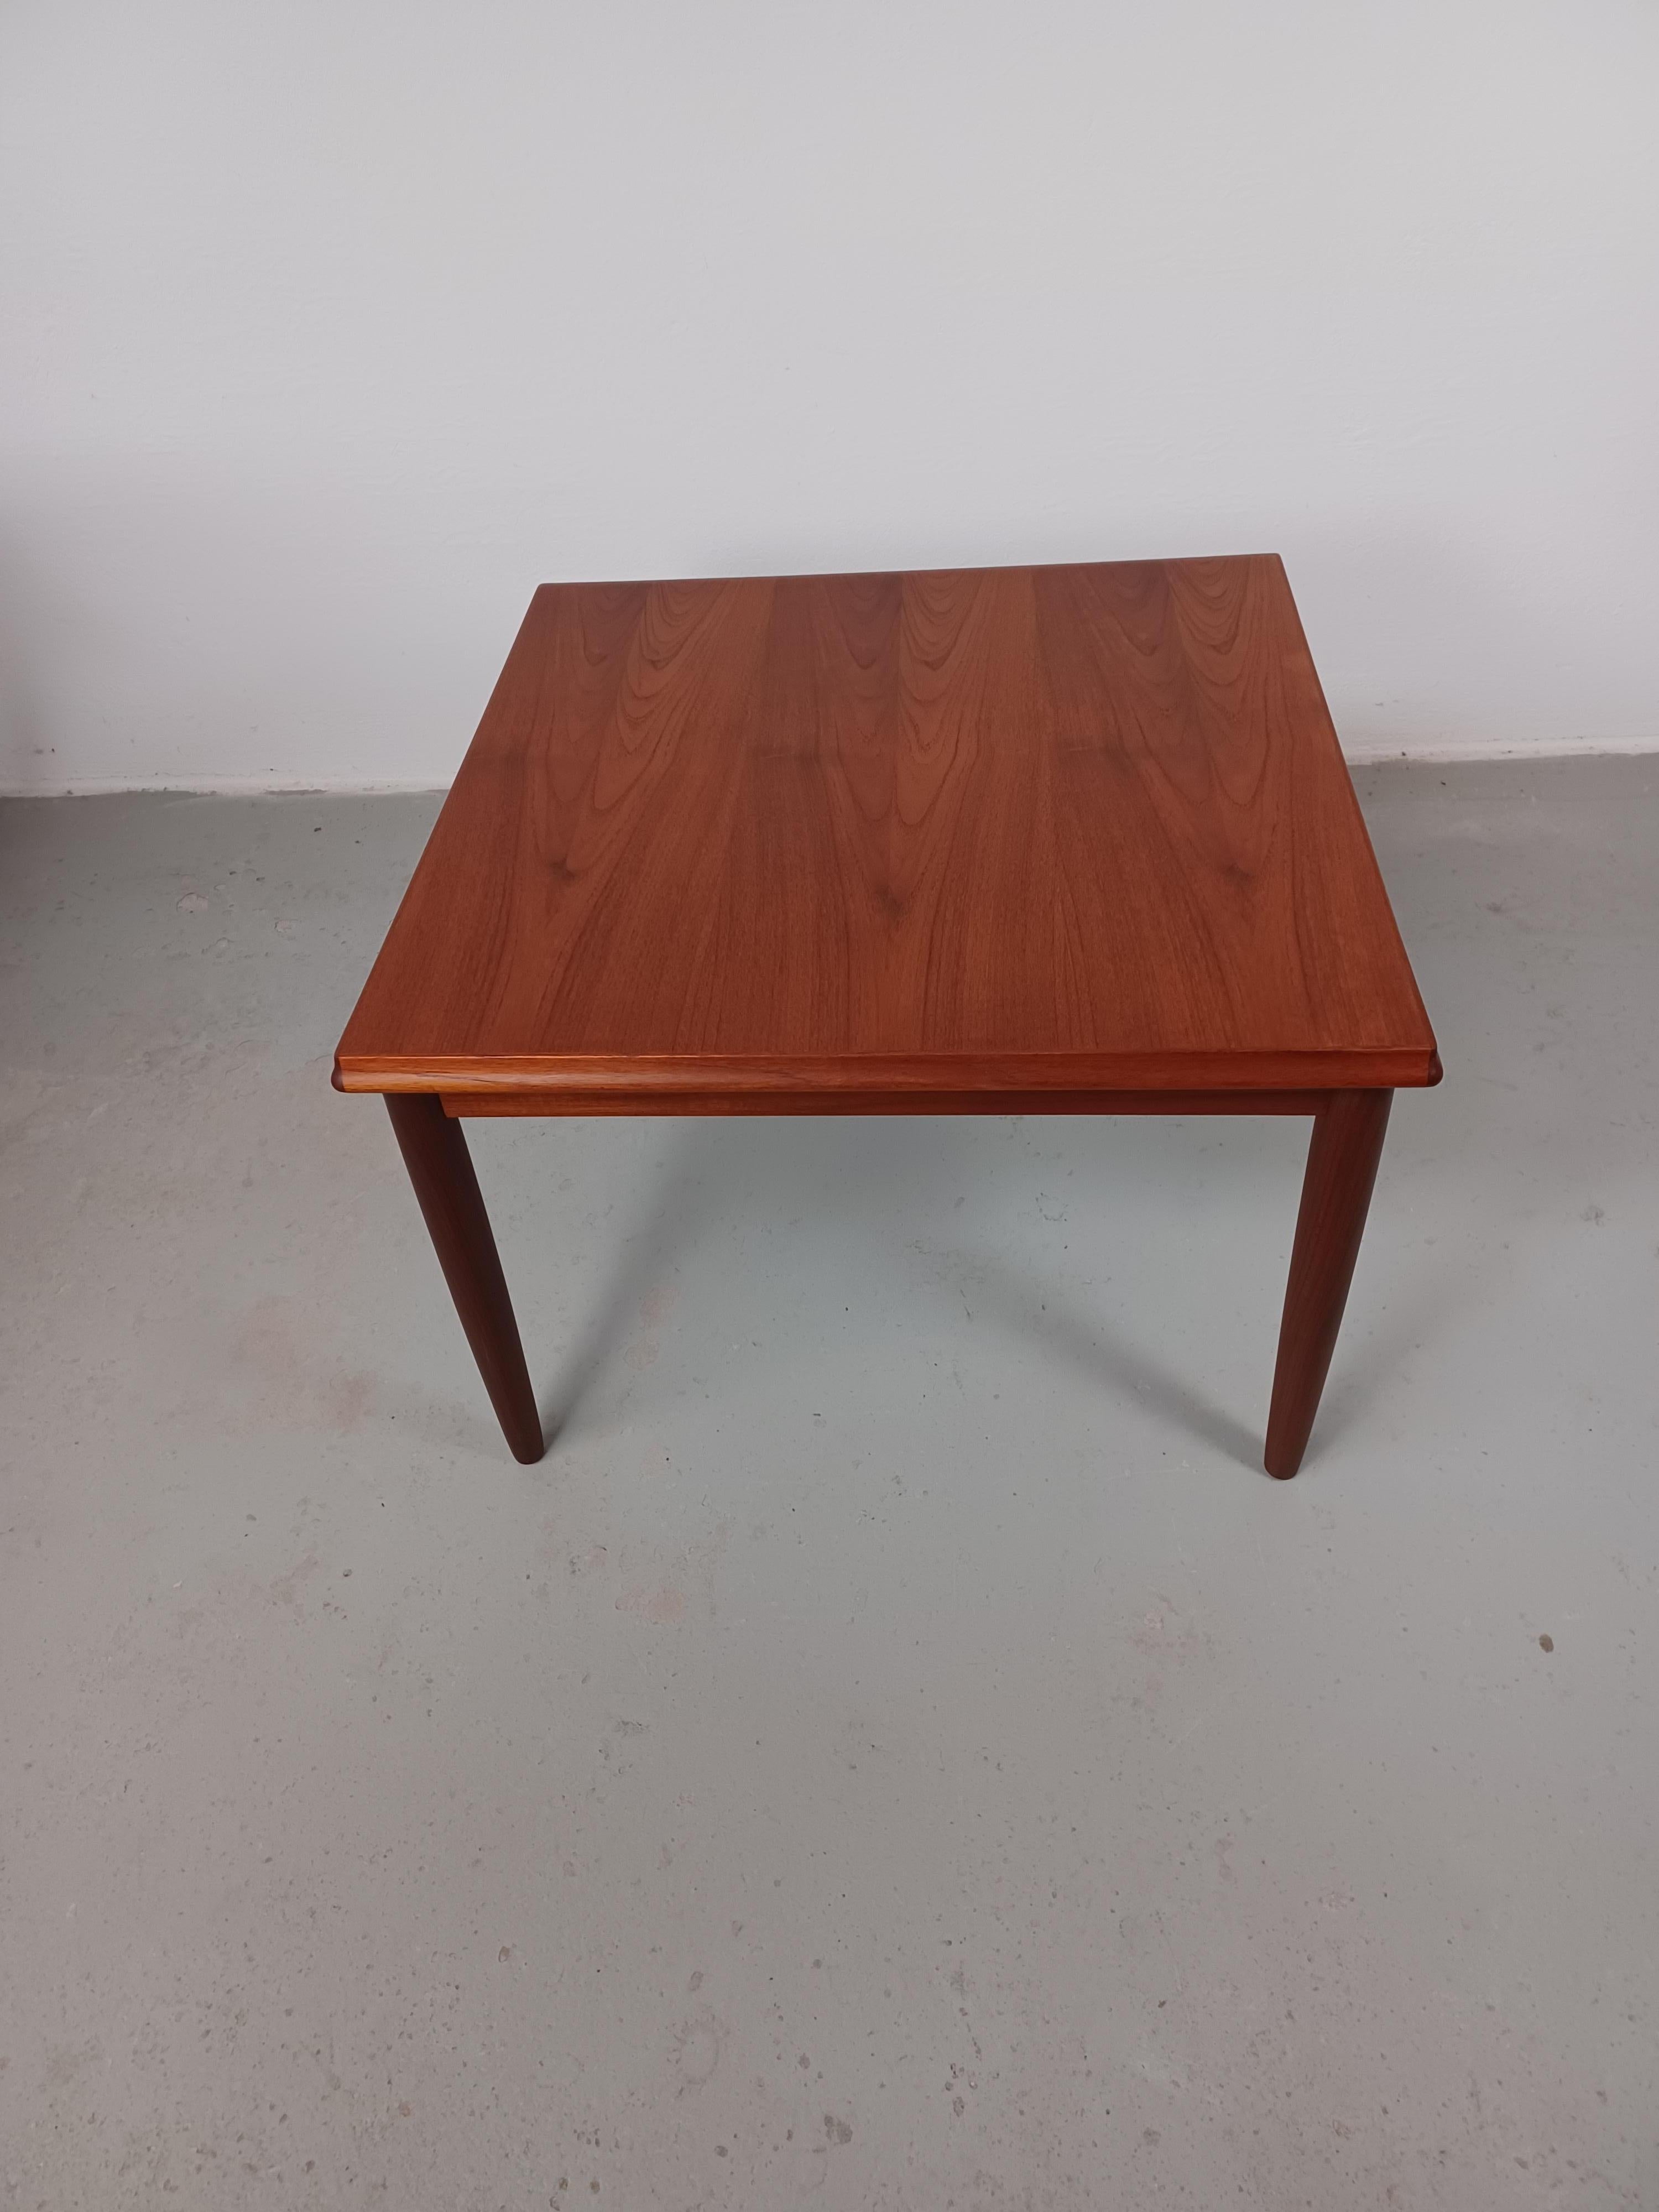 1950s Fully Restored Danish Coffee Table in Teak In Good Condition For Sale In Knebel, DK